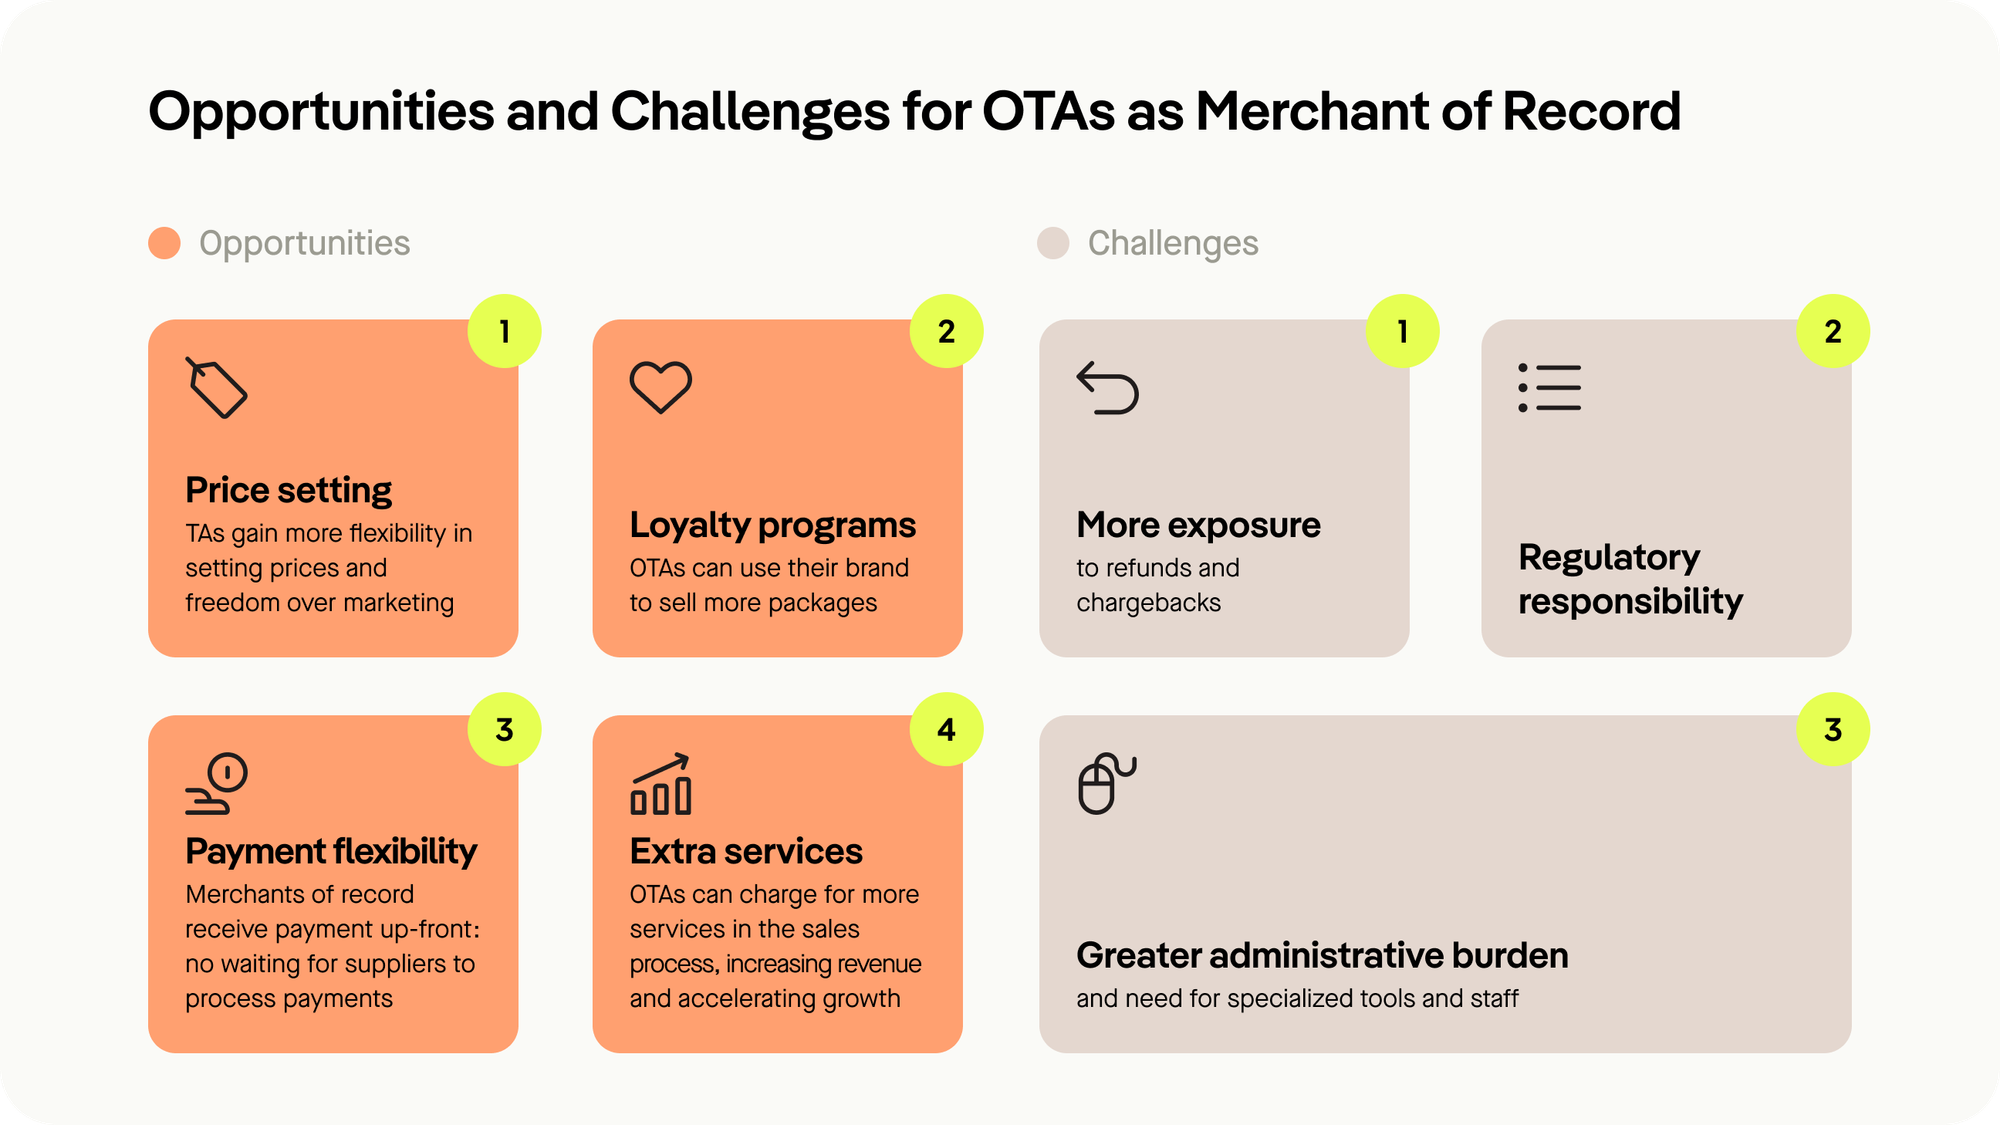 Opportunities for Merchants of Record